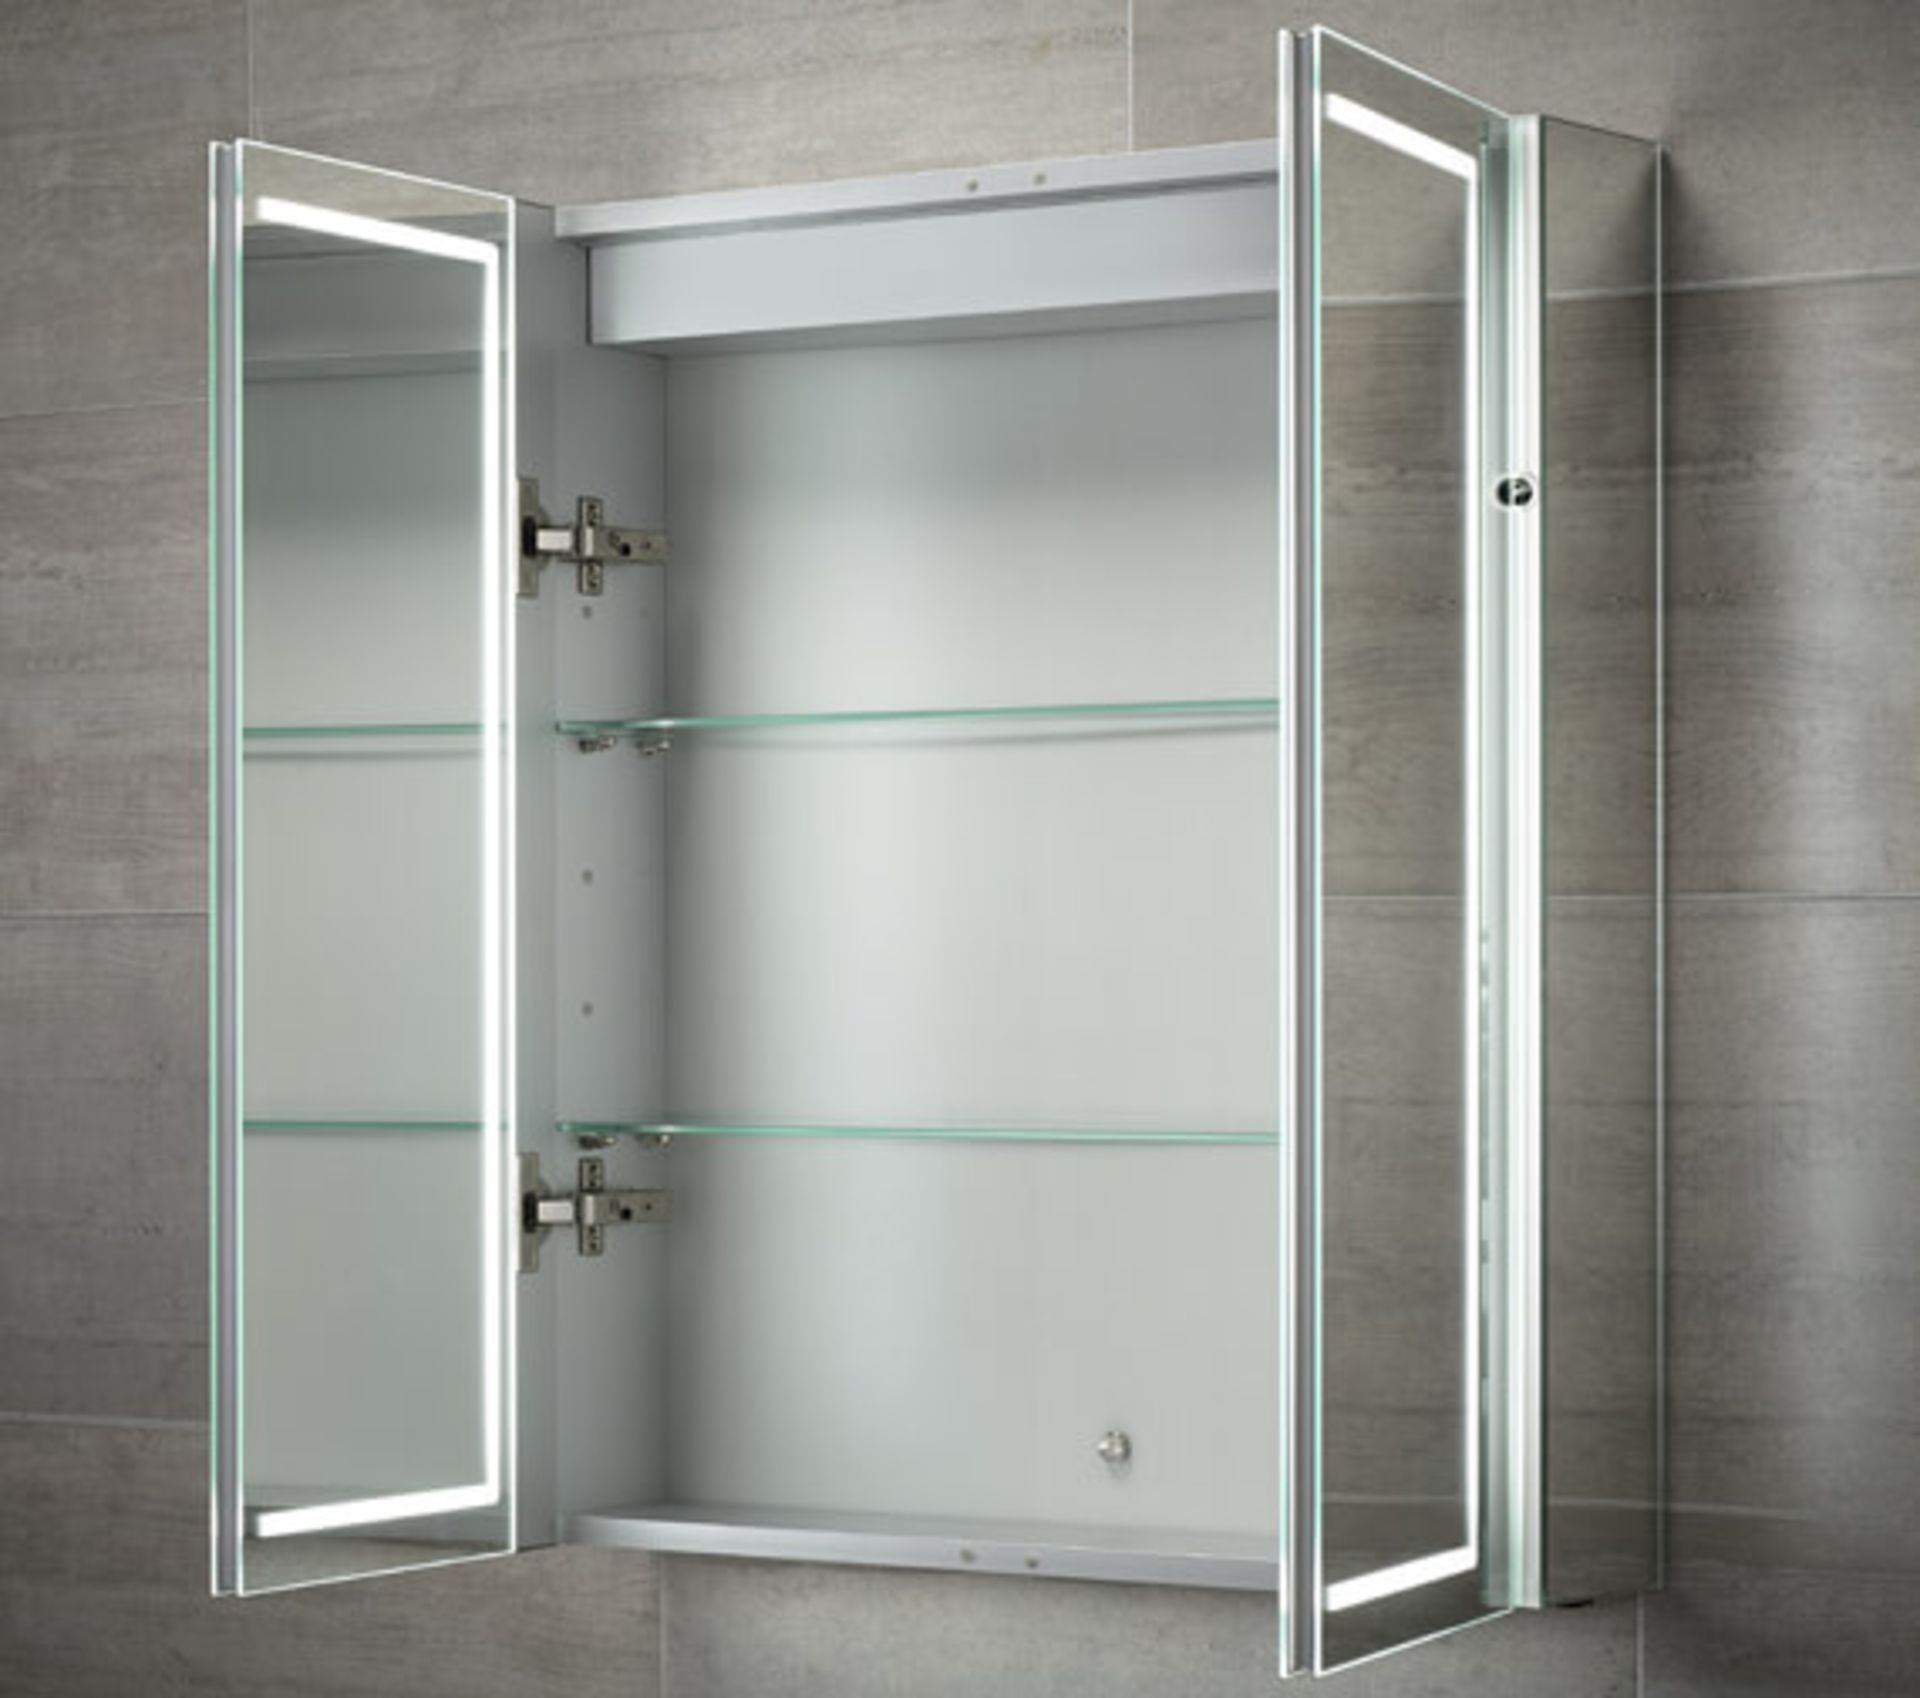 RRP £735. SENSIO 600 x 700mm SONNET DOUBLE DOOR LED MIRROR. By Sensio SE30394CO. 600 x 138 x 700mm - Image 2 of 5